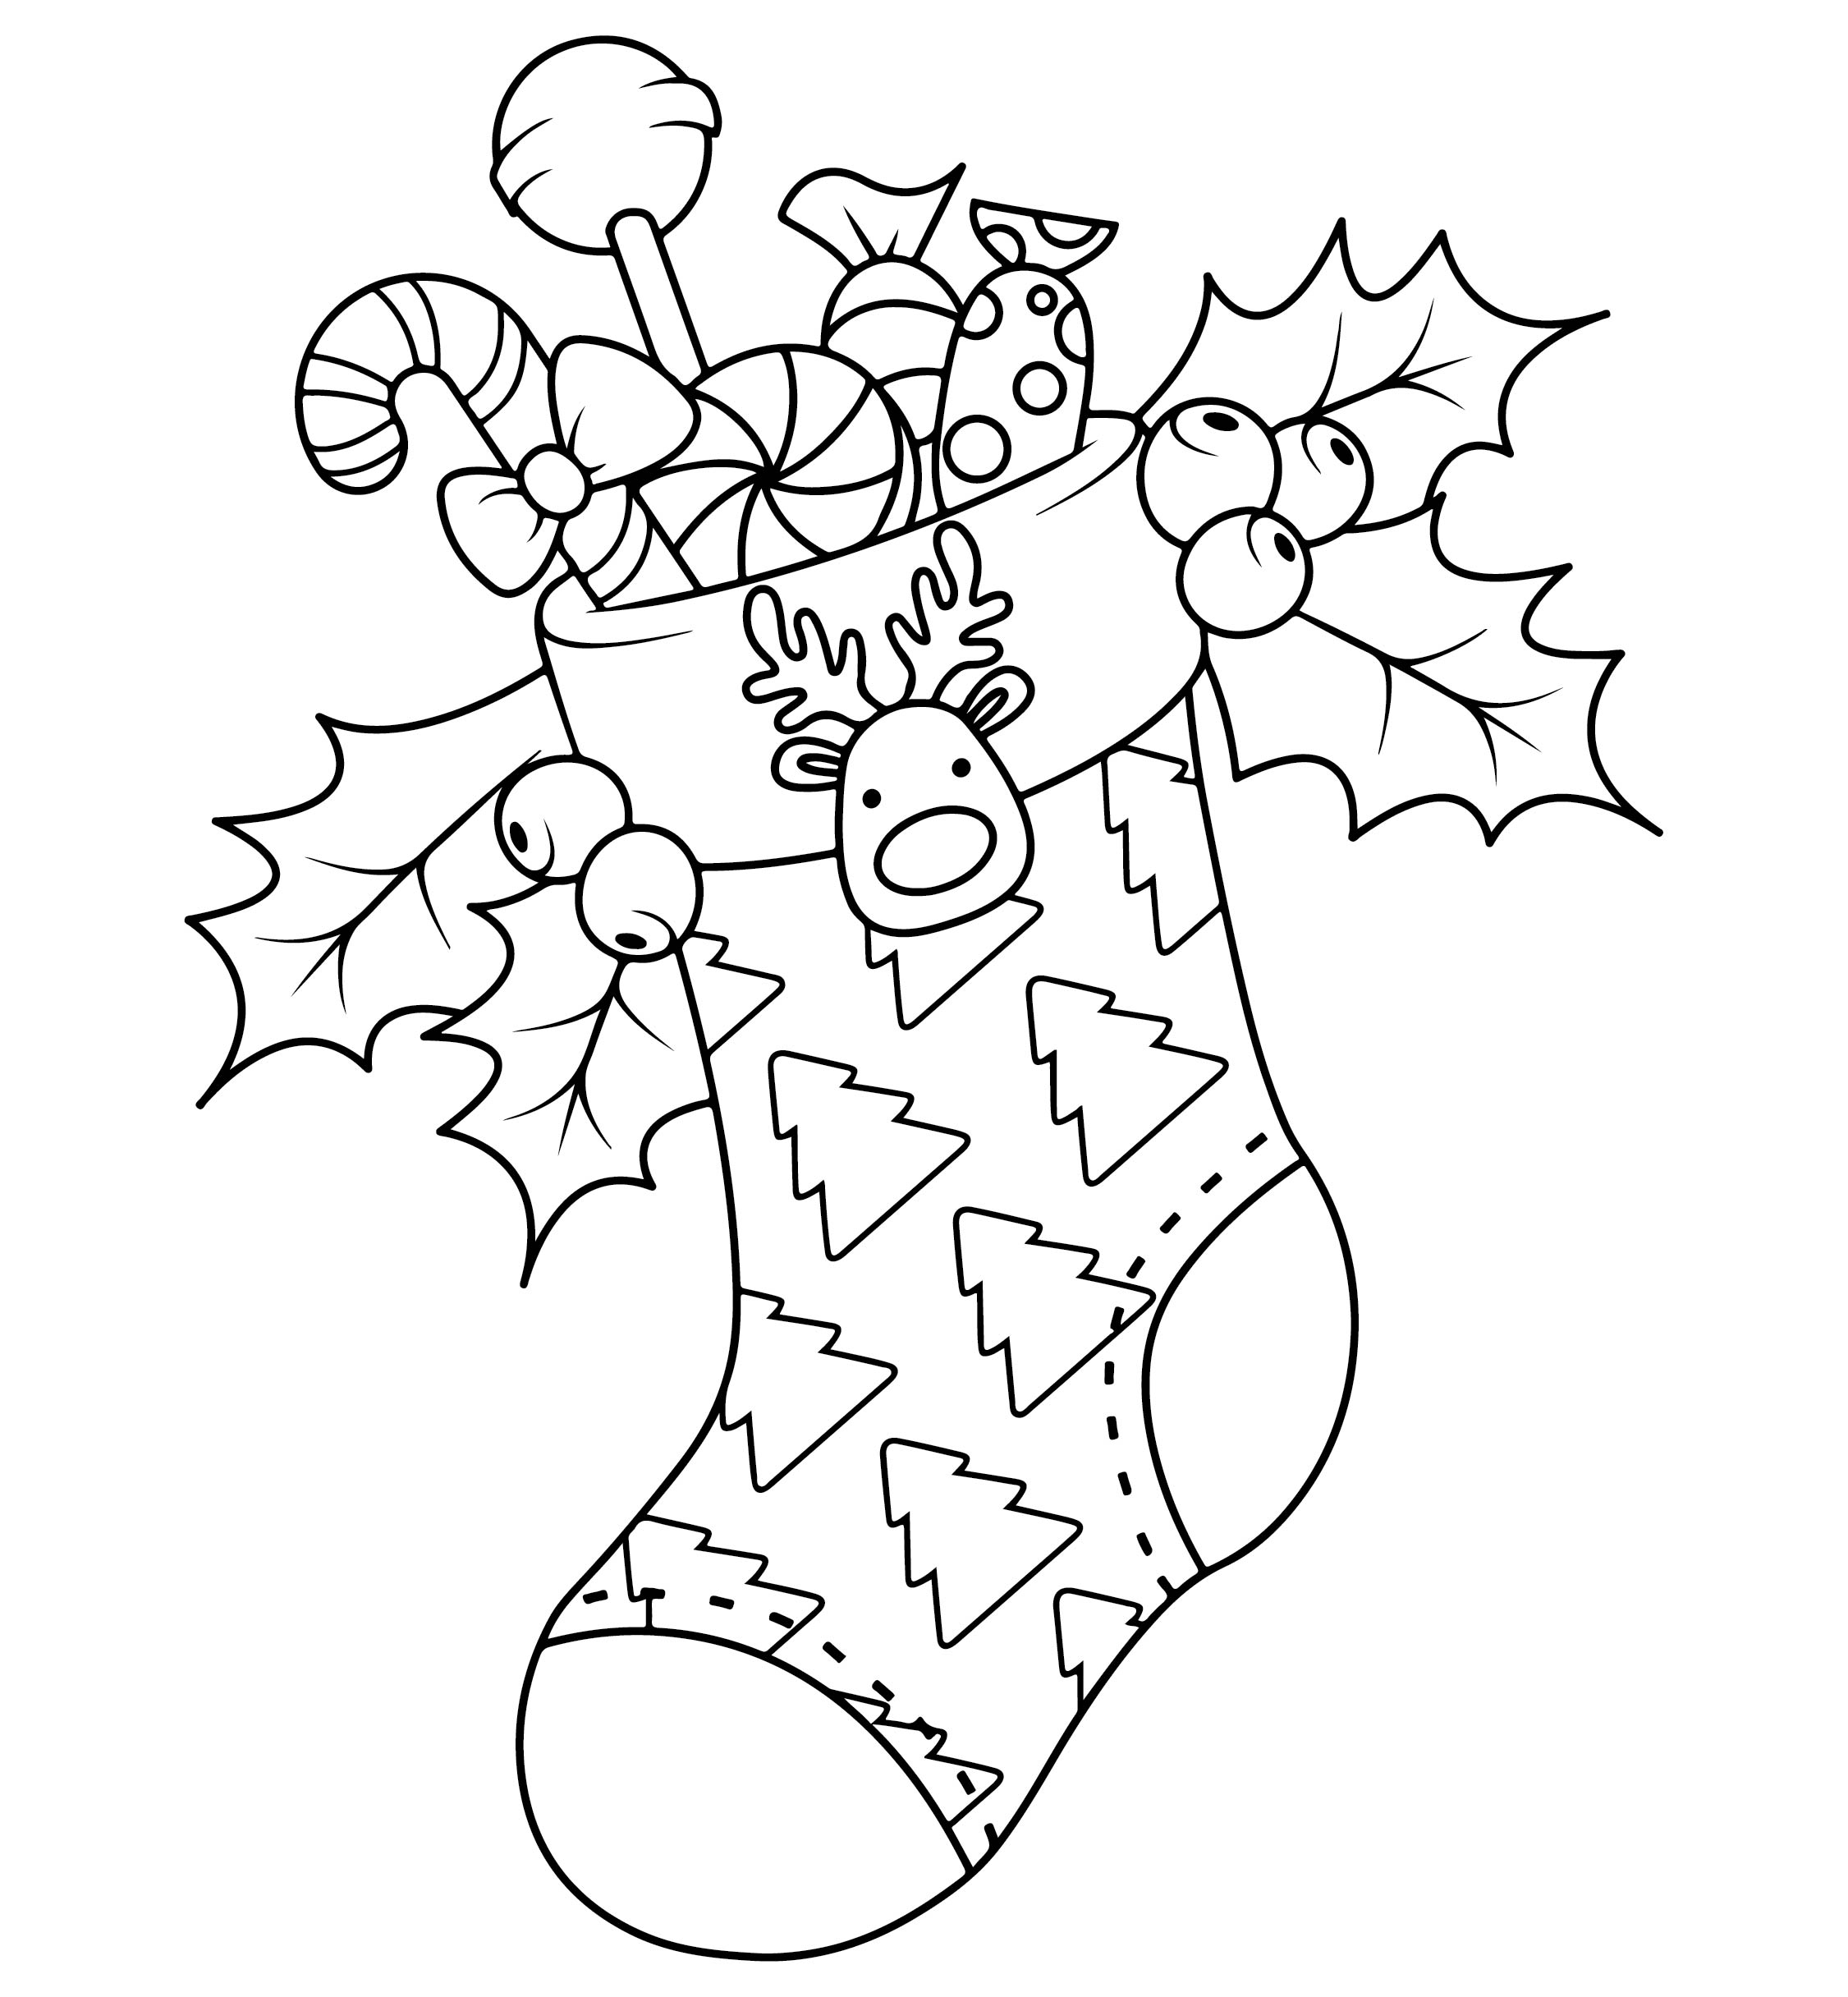 15-best-christmas-stocking-coloring-pages-printable-pdf-for-free-at-printablee